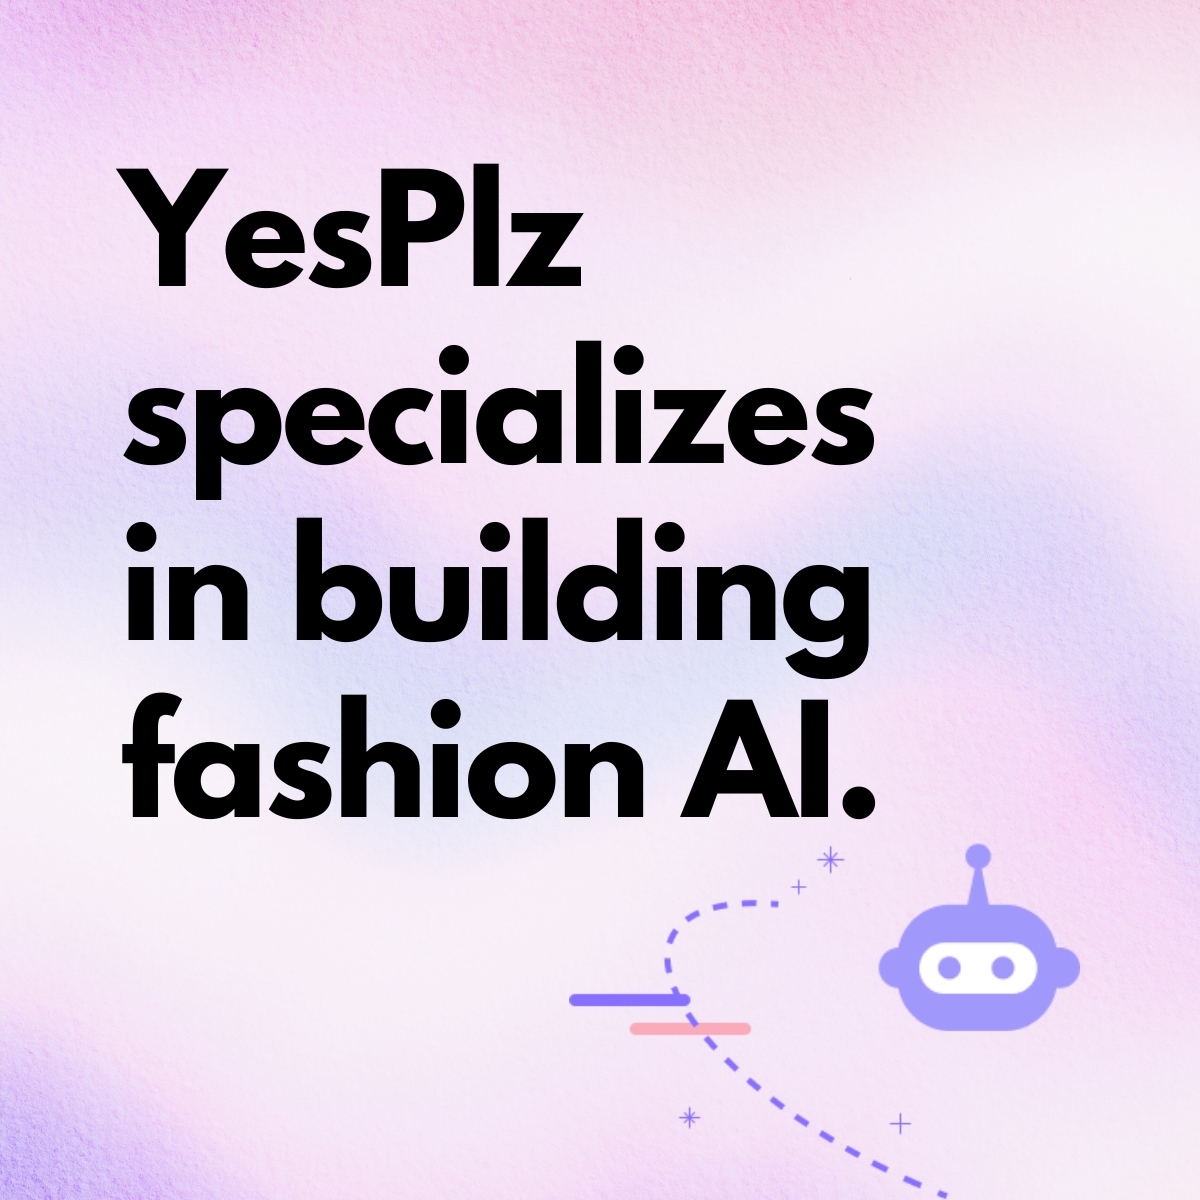 Text against gradient background stating that YesPlz specializes in fashion AI